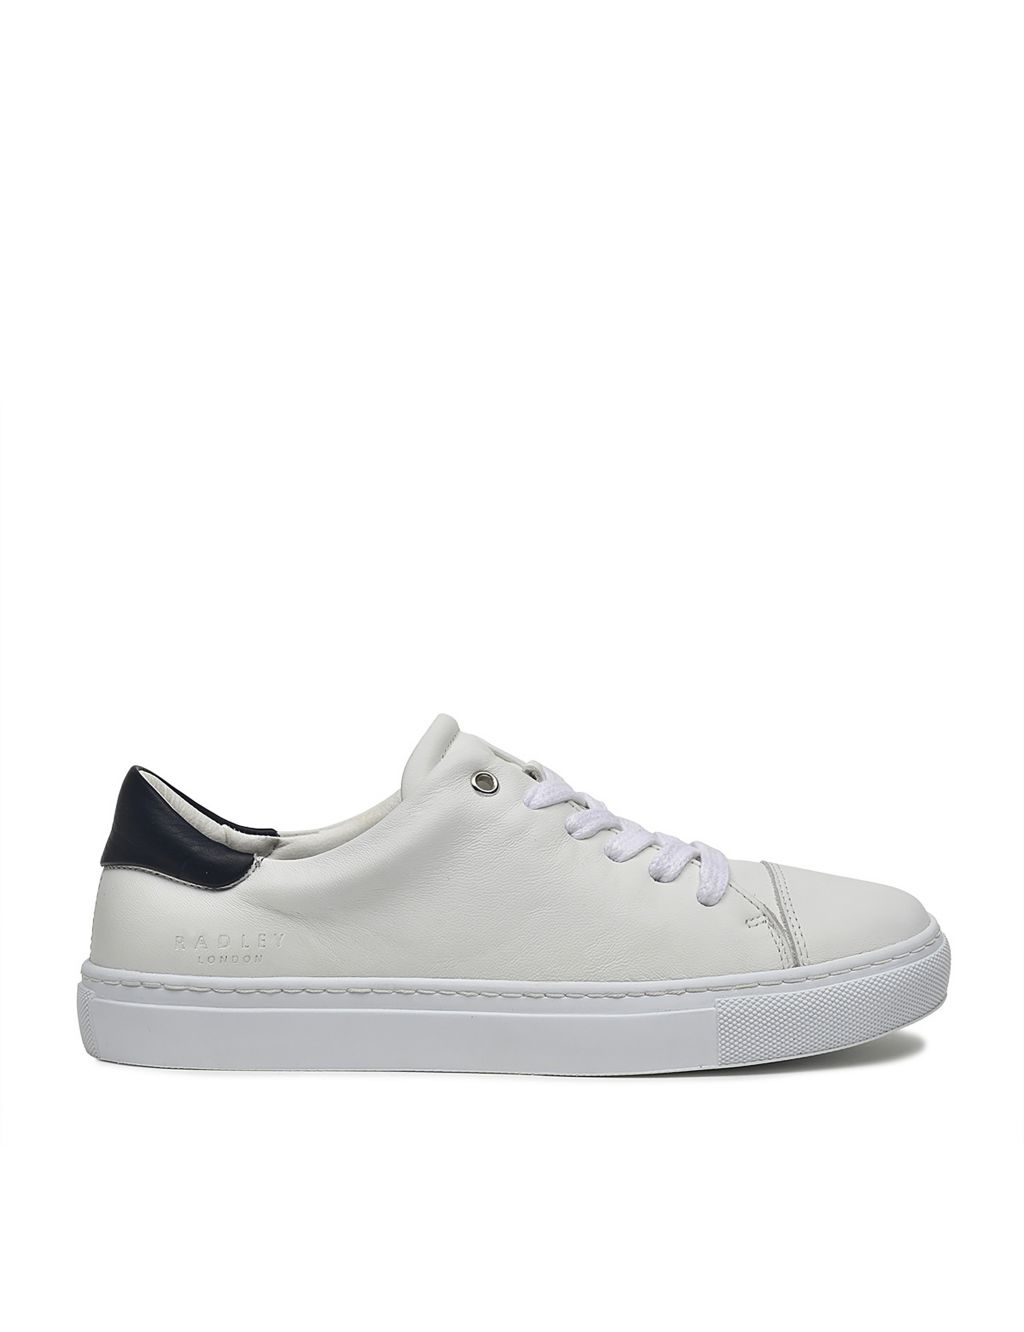 Malton 2.0 Leather Lace Up Trainers 3 of 3